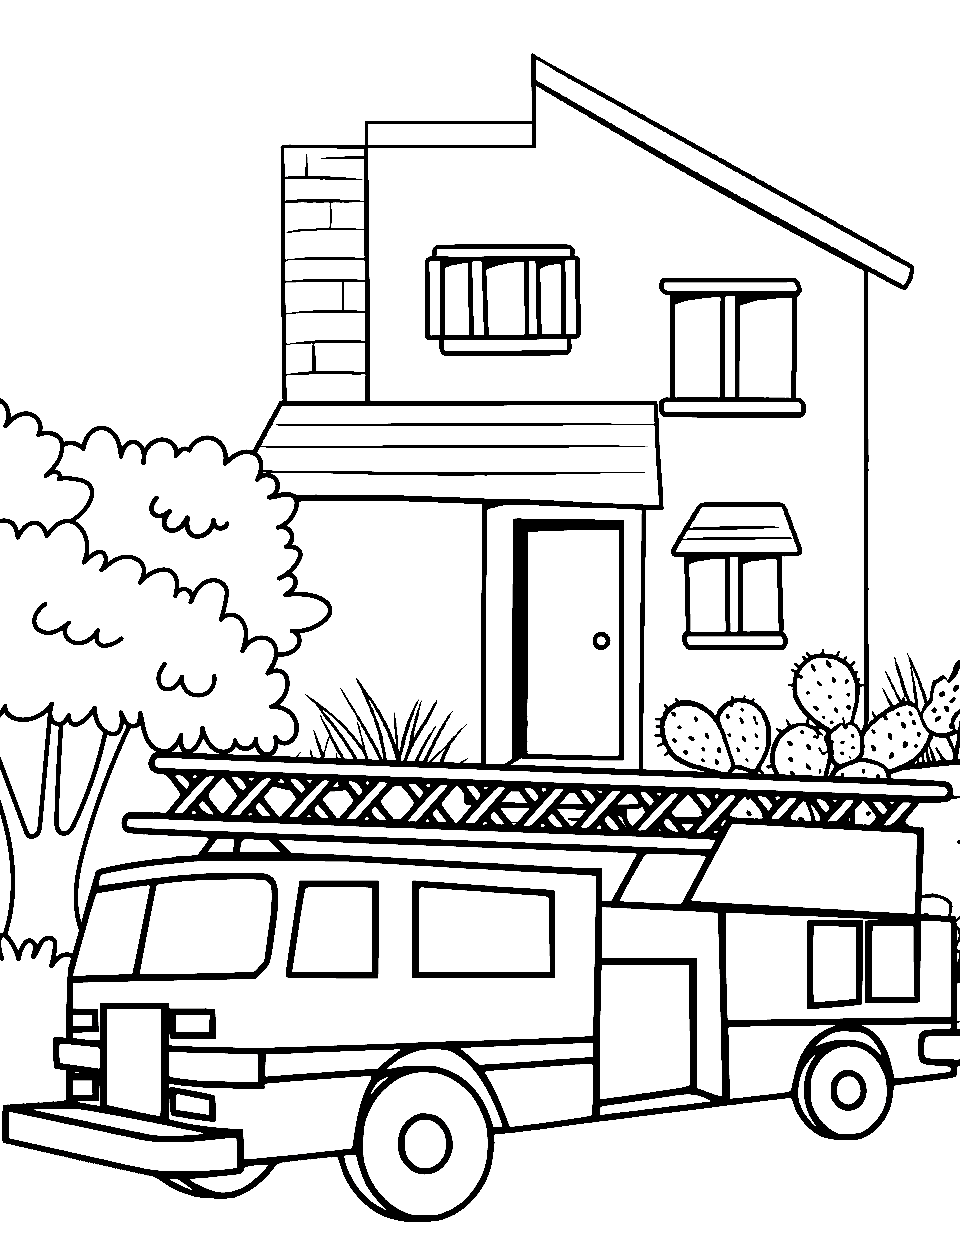 Fire Truck Outside Coloring Page - A fire truck parked outside a building.